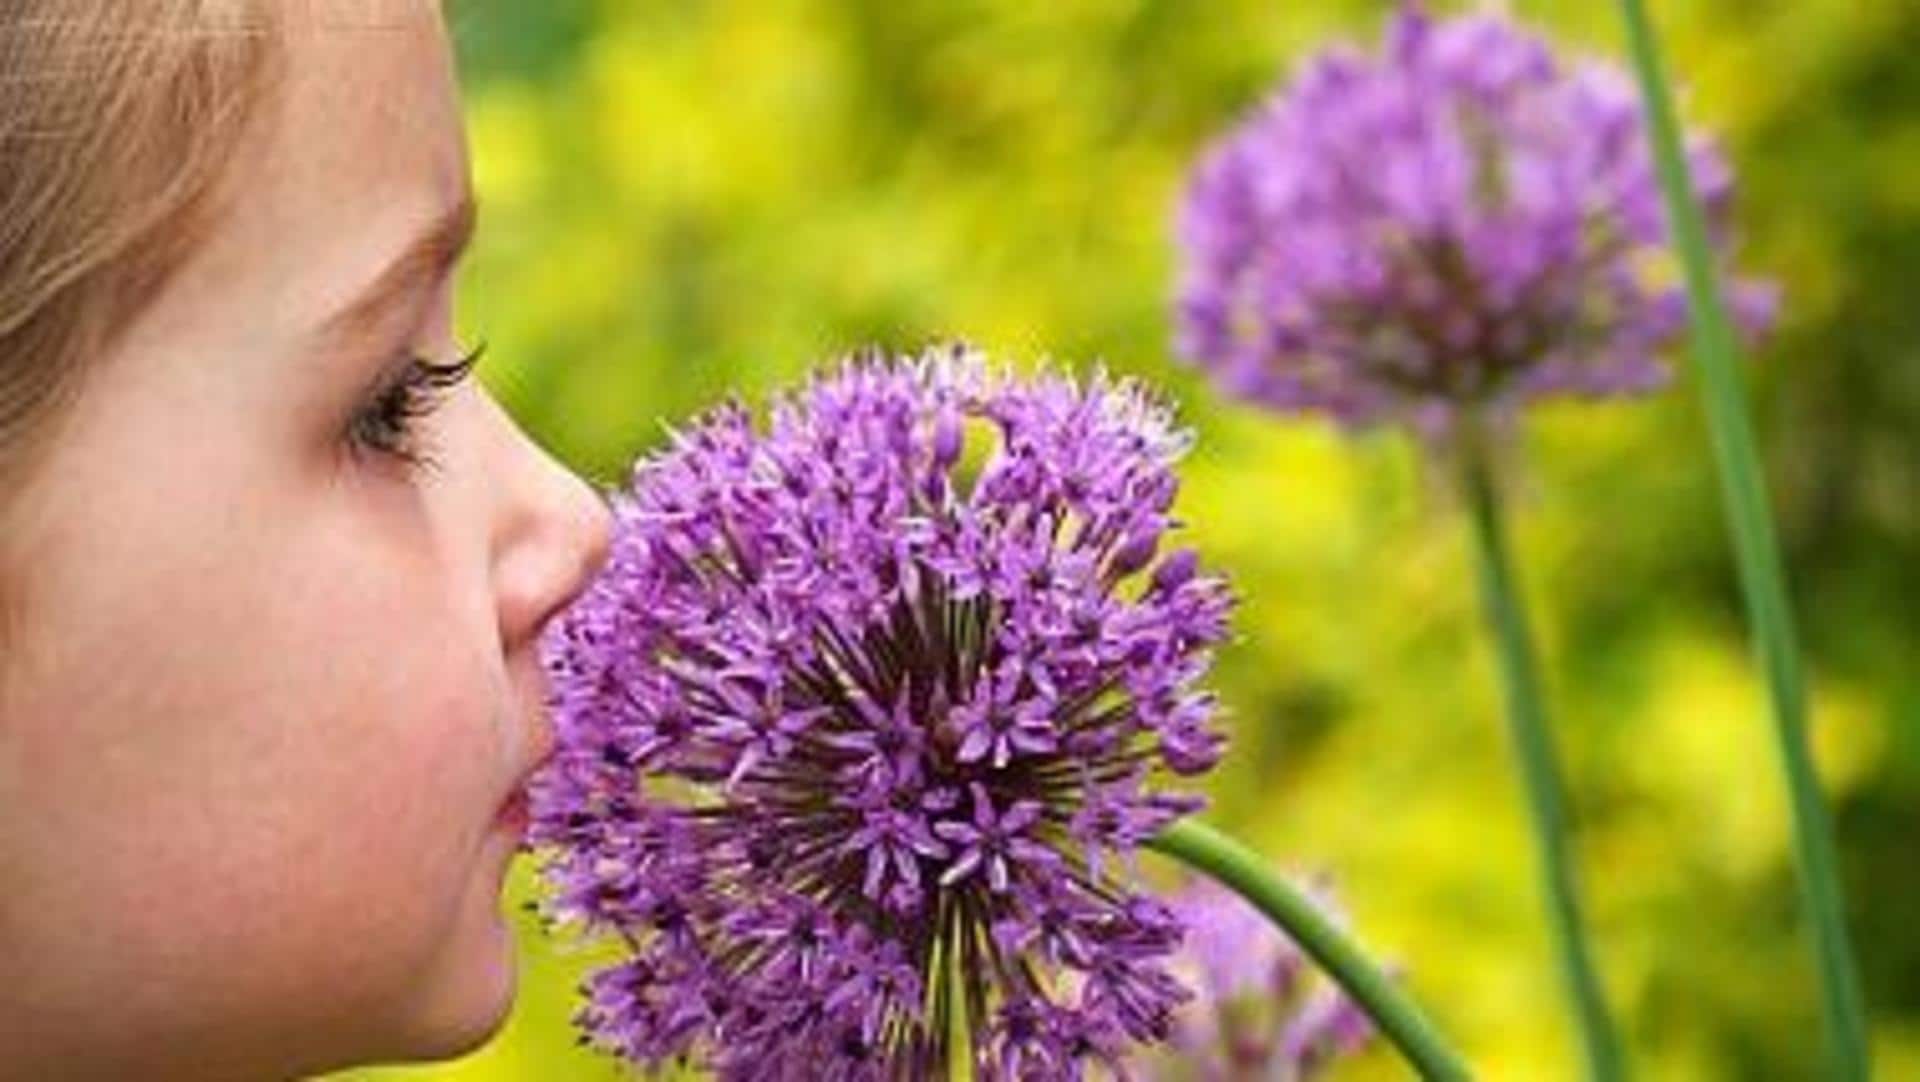 Scientists may have solved the mystery behind how we smell